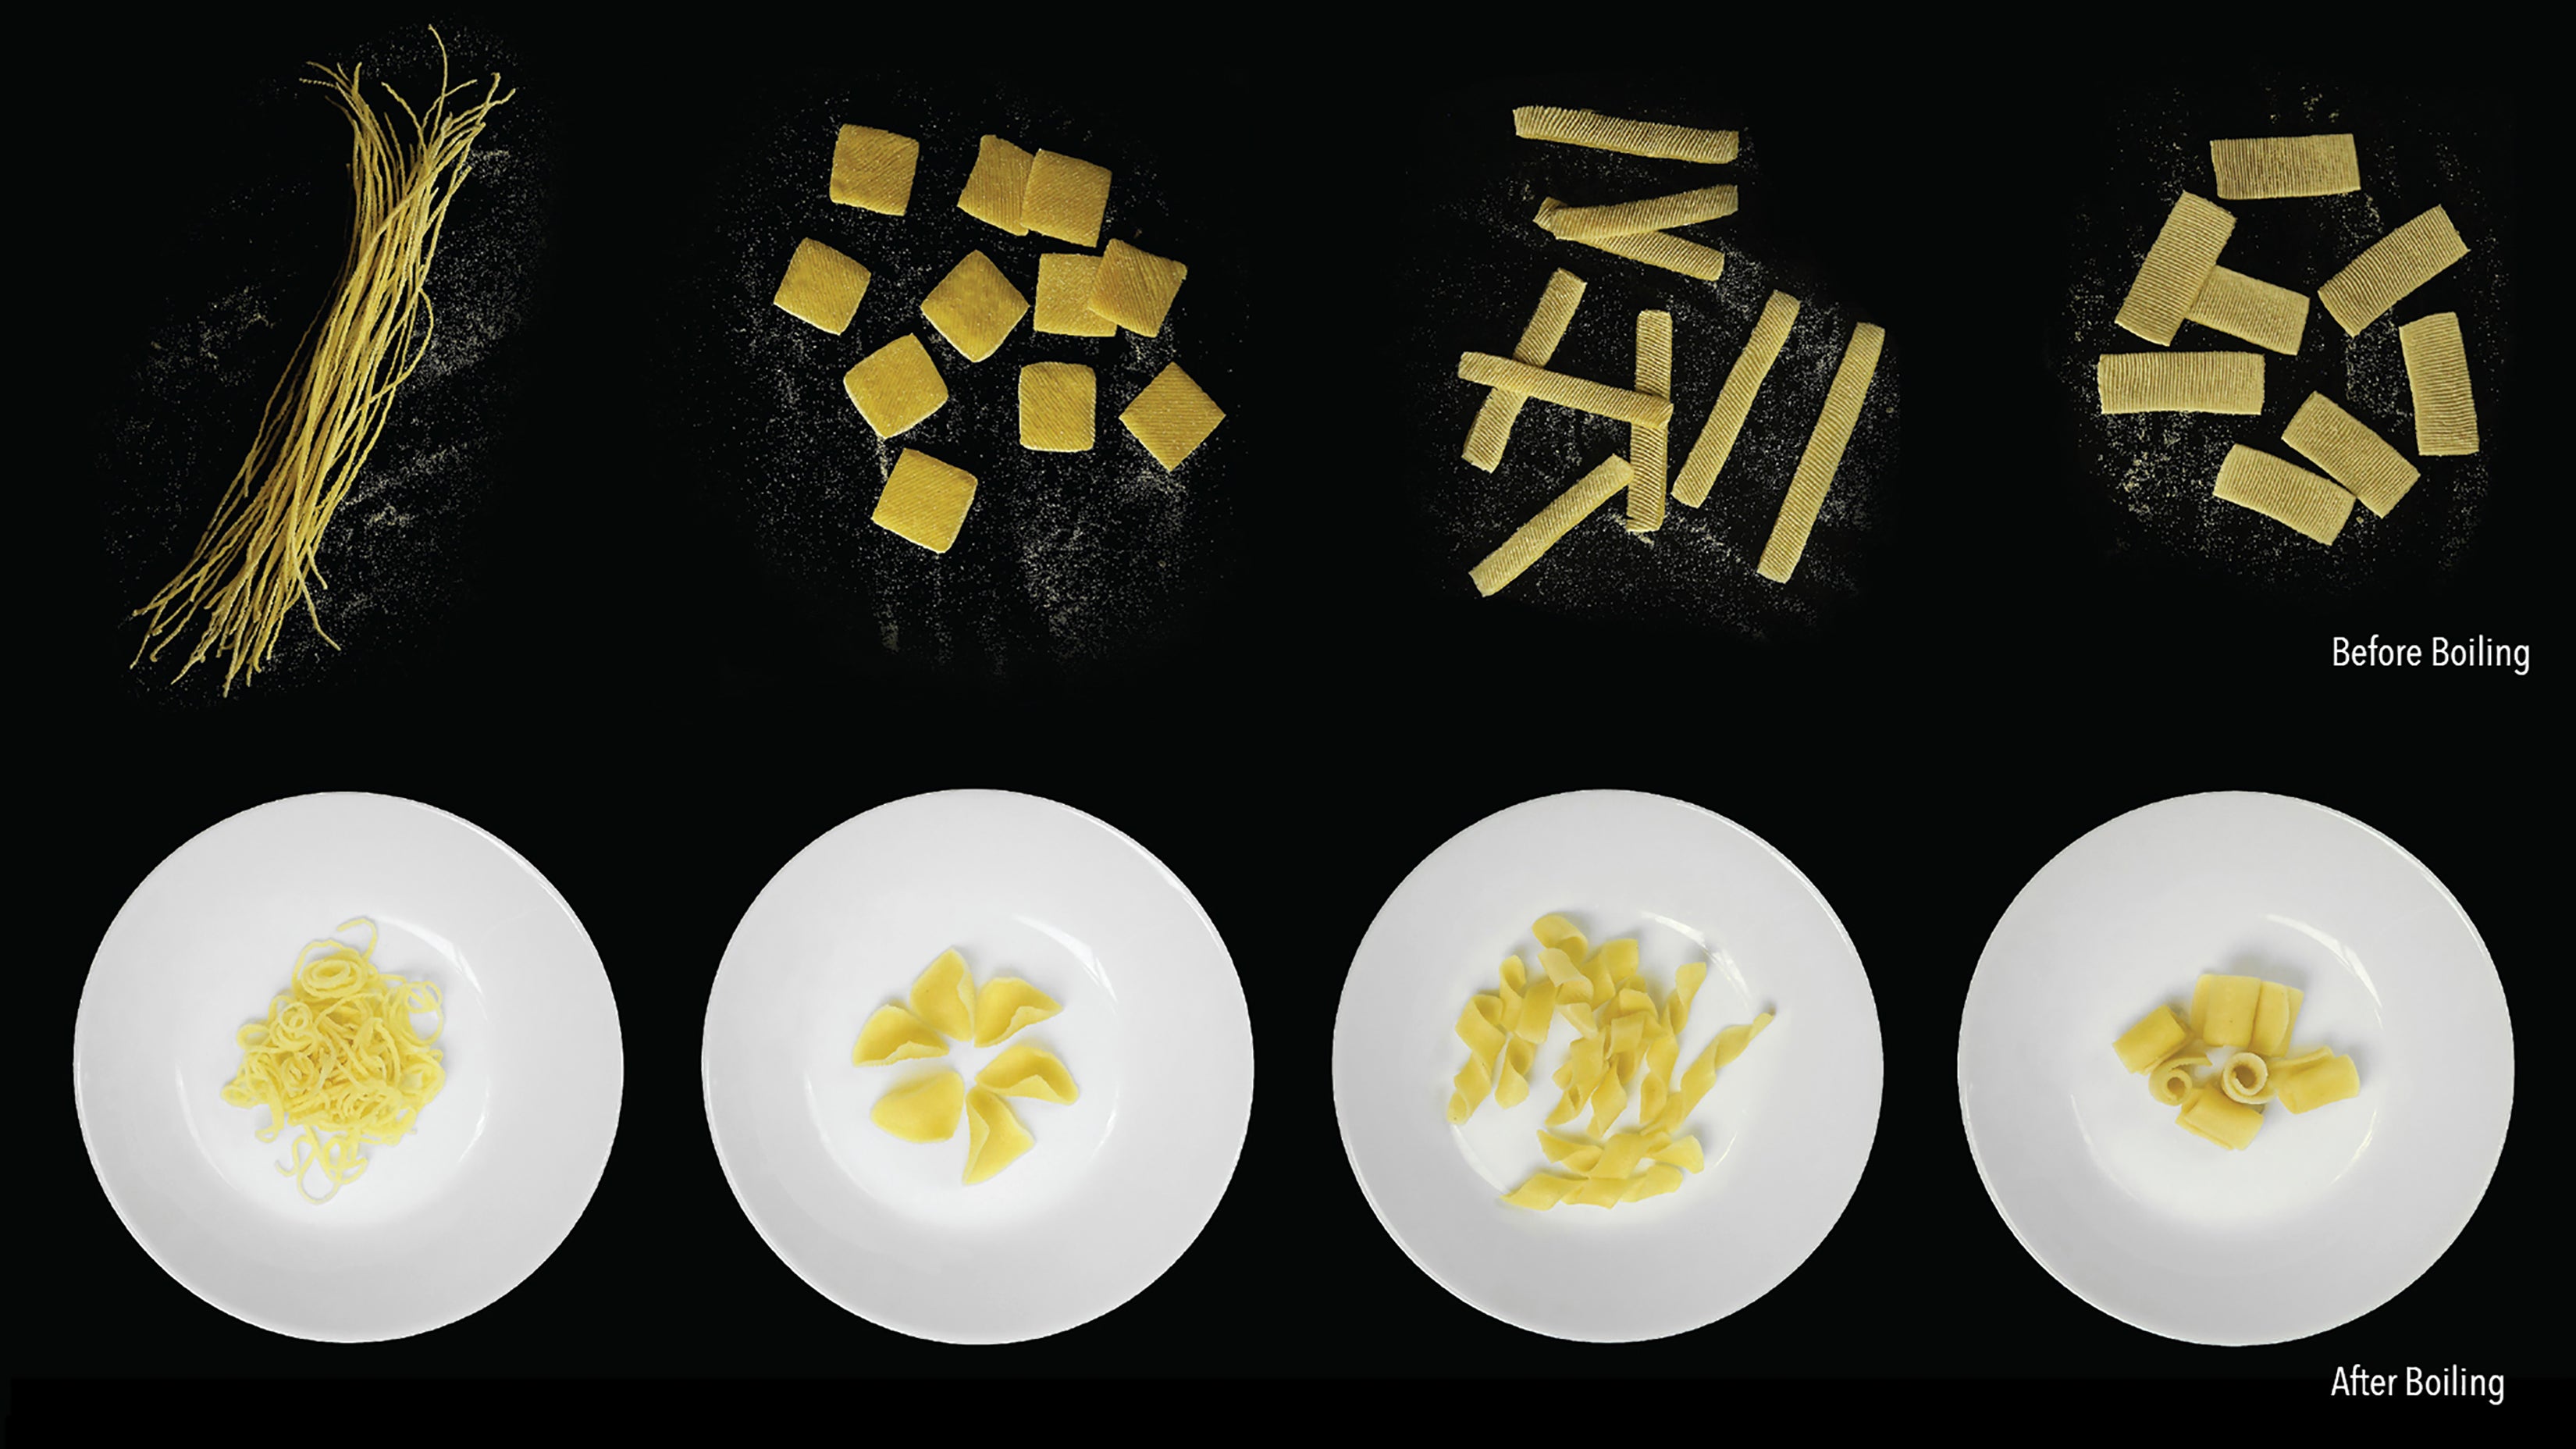 Four different designs of the shape-shifting pasta